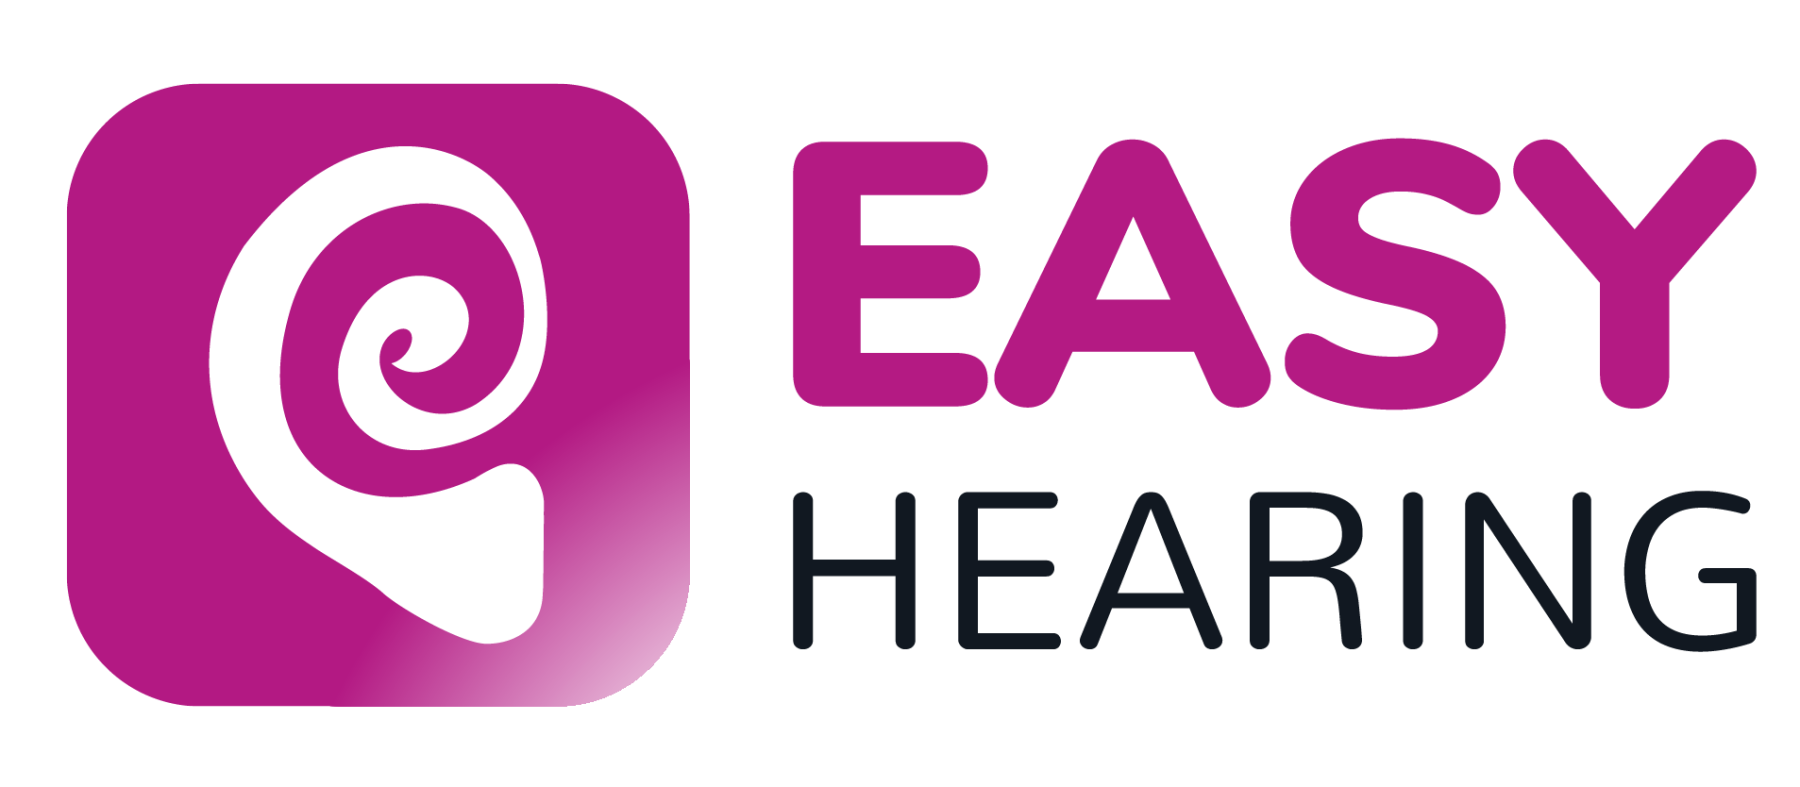 Easy Hearing Audiology